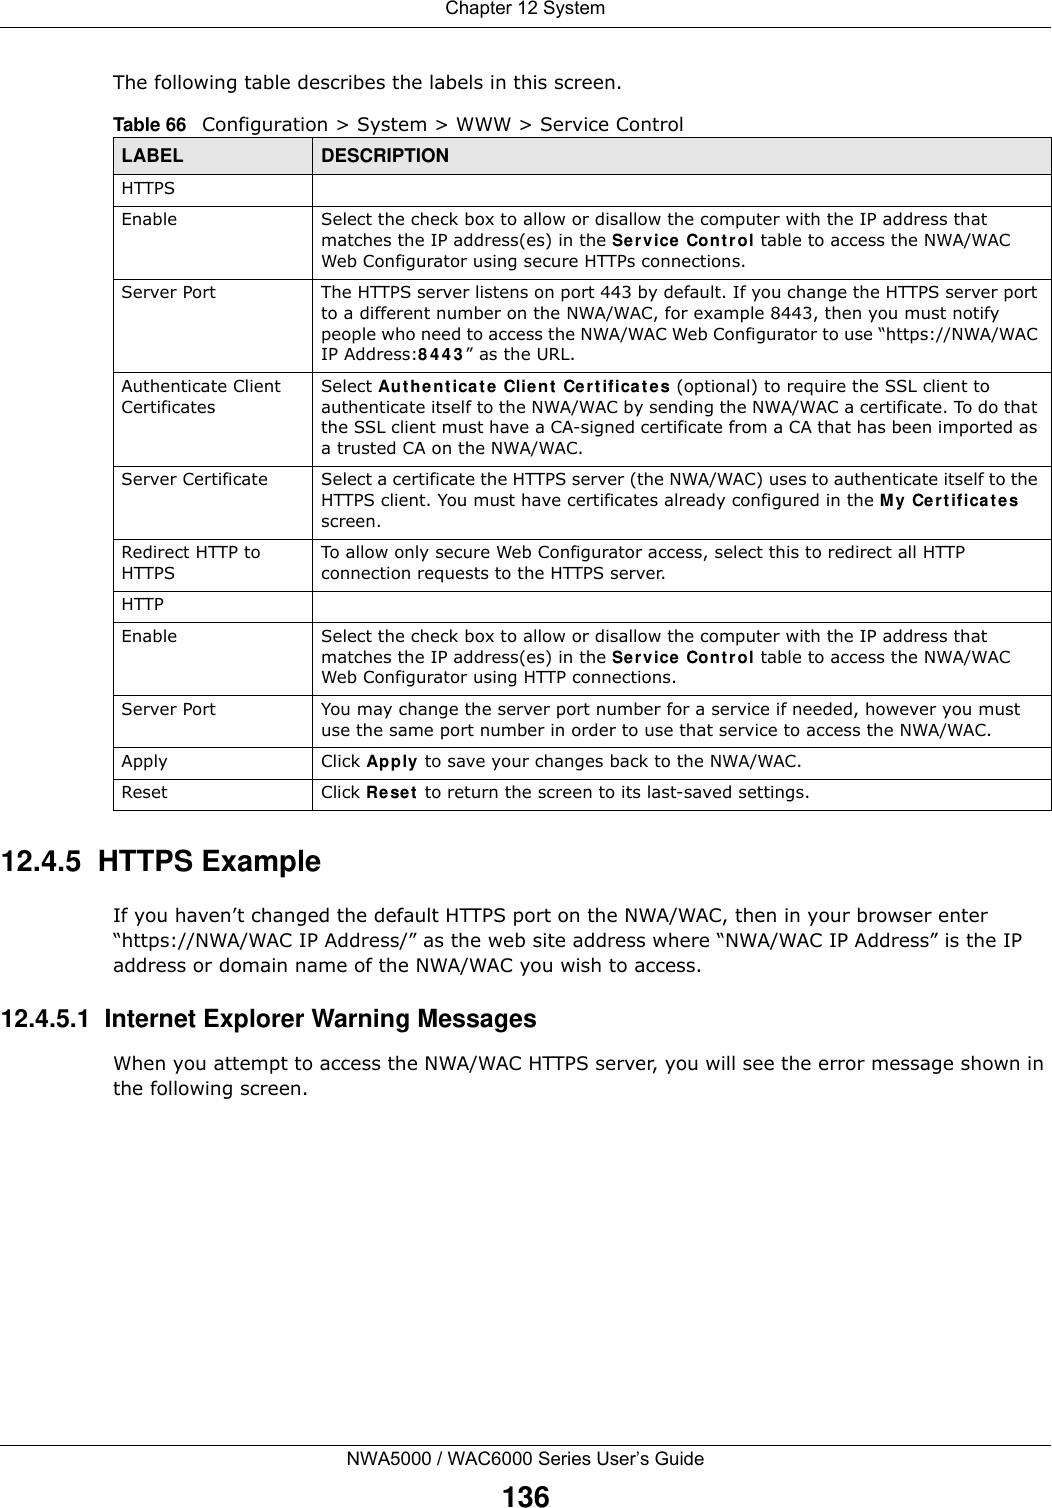 Chapter 12 SystemNWA5000 / WAC6000 Series User’s Guide136The following table describes the labels in this screen.  12.4.5  HTTPS ExampleIf you haven’t changed the default HTTPS port on the NWA/WAC, then in your browser enter “https://NWA/WAC IP Address/” as the web site address where “NWA/WAC IP Address” is the IP address or domain name of the NWA/WAC you wish to access.12.4.5.1  Internet Explorer Warning MessagesWhen you attempt to access the NWA/WAC HTTPS server, you will see the error message shown in the following screen.Table 66   Configuration &gt; System &gt; WWW &gt; Service ControlLABEL DESCRIPTIONHTTPSEnable Select the check box to allow or disallow the computer with the IP address that matches the IP address(es) in the Service Control table to access the NWA/WAC Web Configurator using secure HTTPs connections.Server Port The HTTPS server listens on port 443 by default. If you change the HTTPS server port to a different number on the NWA/WAC, for example 8443, then you must notify people who need to access the NWA/WAC Web Configurator to use “https://NWA/WAC IP Address:8443” as the URL.Authenticate Client CertificatesSelect Authenticate Client Certificates (optional) to require the SSL client to authenticate itself to the NWA/WAC by sending the NWA/WAC a certificate. To do that the SSL client must have a CA-signed certificate from a CA that has been imported as a trusted CA on the NWA/WAC.Server Certificate Select a certificate the HTTPS server (the NWA/WAC) uses to authenticate itself to the HTTPS client. You must have certificates already configured in the My Certificates screen.Redirect HTTP to HTTPS To allow only secure Web Configurator access, select this to redirect all HTTP connection requests to the HTTPS server.HTTPEnable Select the check box to allow or disallow the computer with the IP address that matches the IP address(es) in the Service Control table to access the NWA/WAC Web Configurator using HTTP connections.Server Port You may change the server port number for a service if needed, however you must use the same port number in order to use that service to access the NWA/WAC.Apply Click Apply to save your changes back to the NWA/WAC. Reset Click Reset to return the screen to its last-saved settings. 